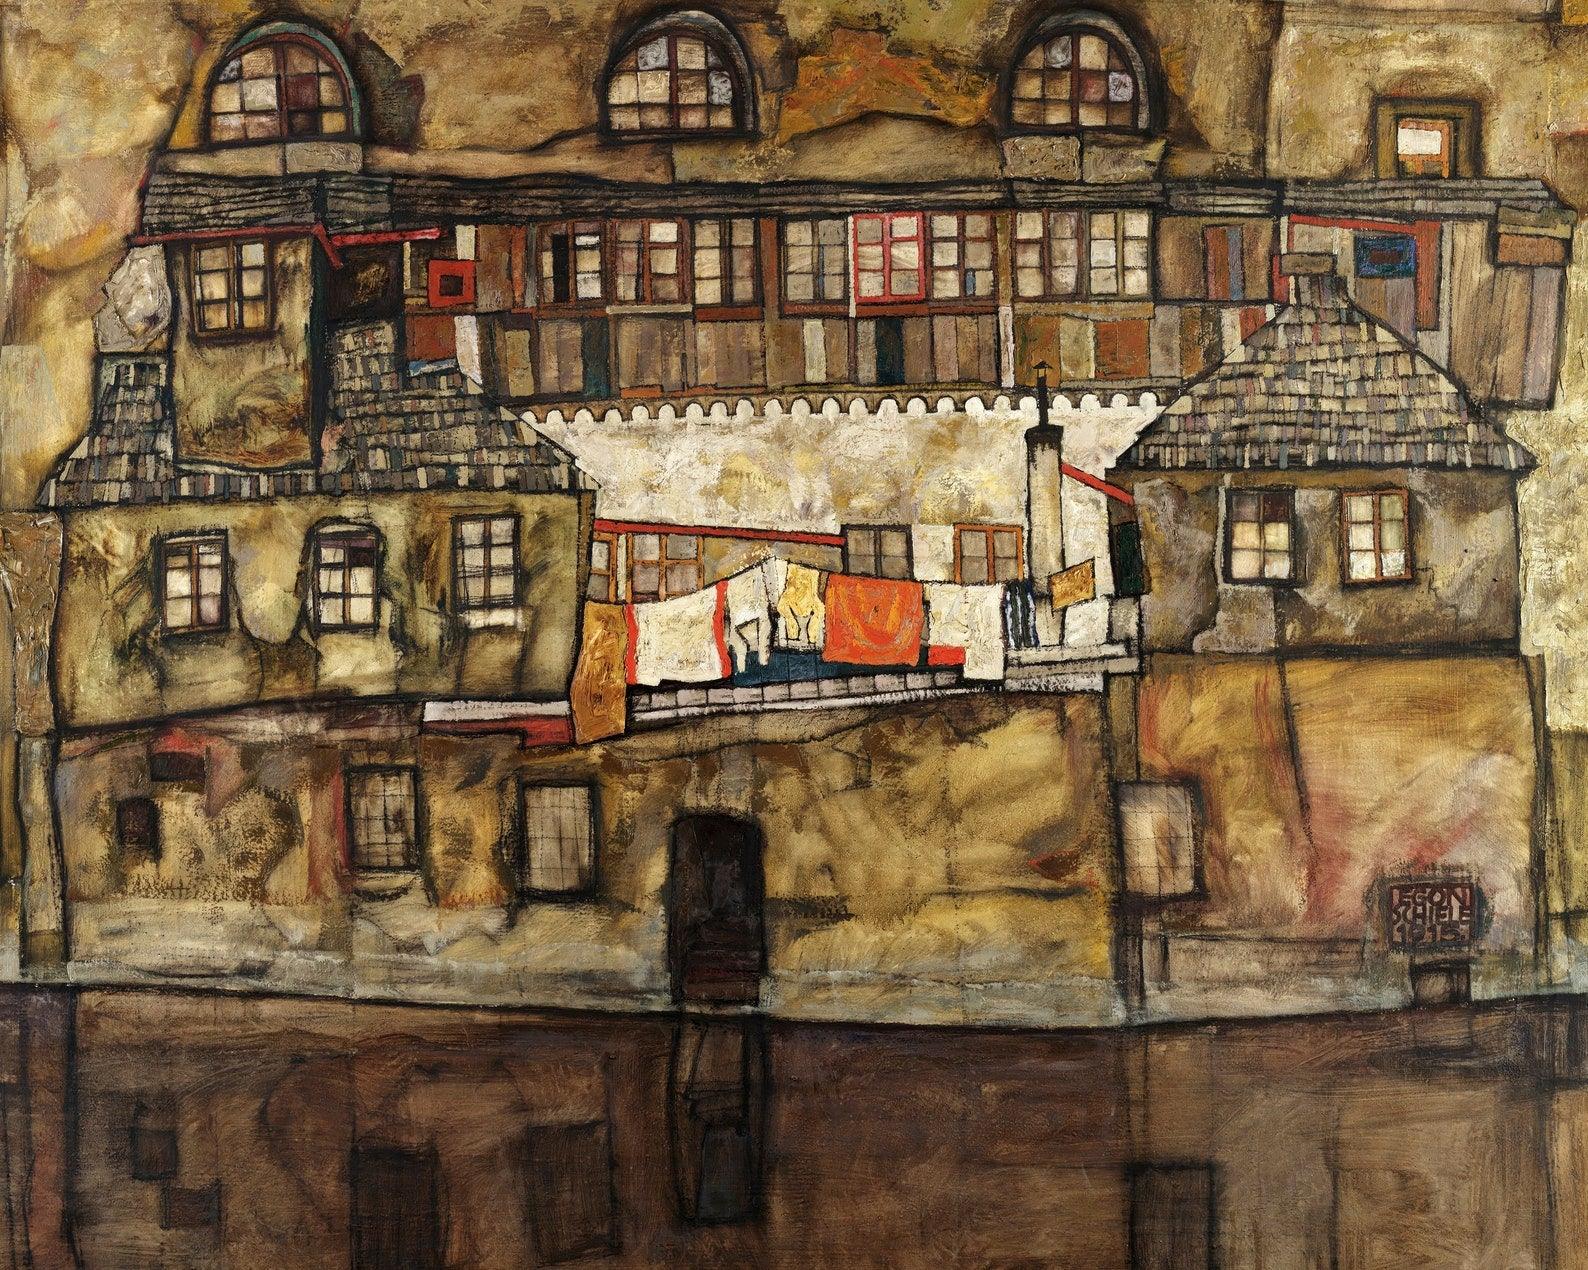 Egon Schiele "House Wall on the River" (c.1915) - Mabon Gallery